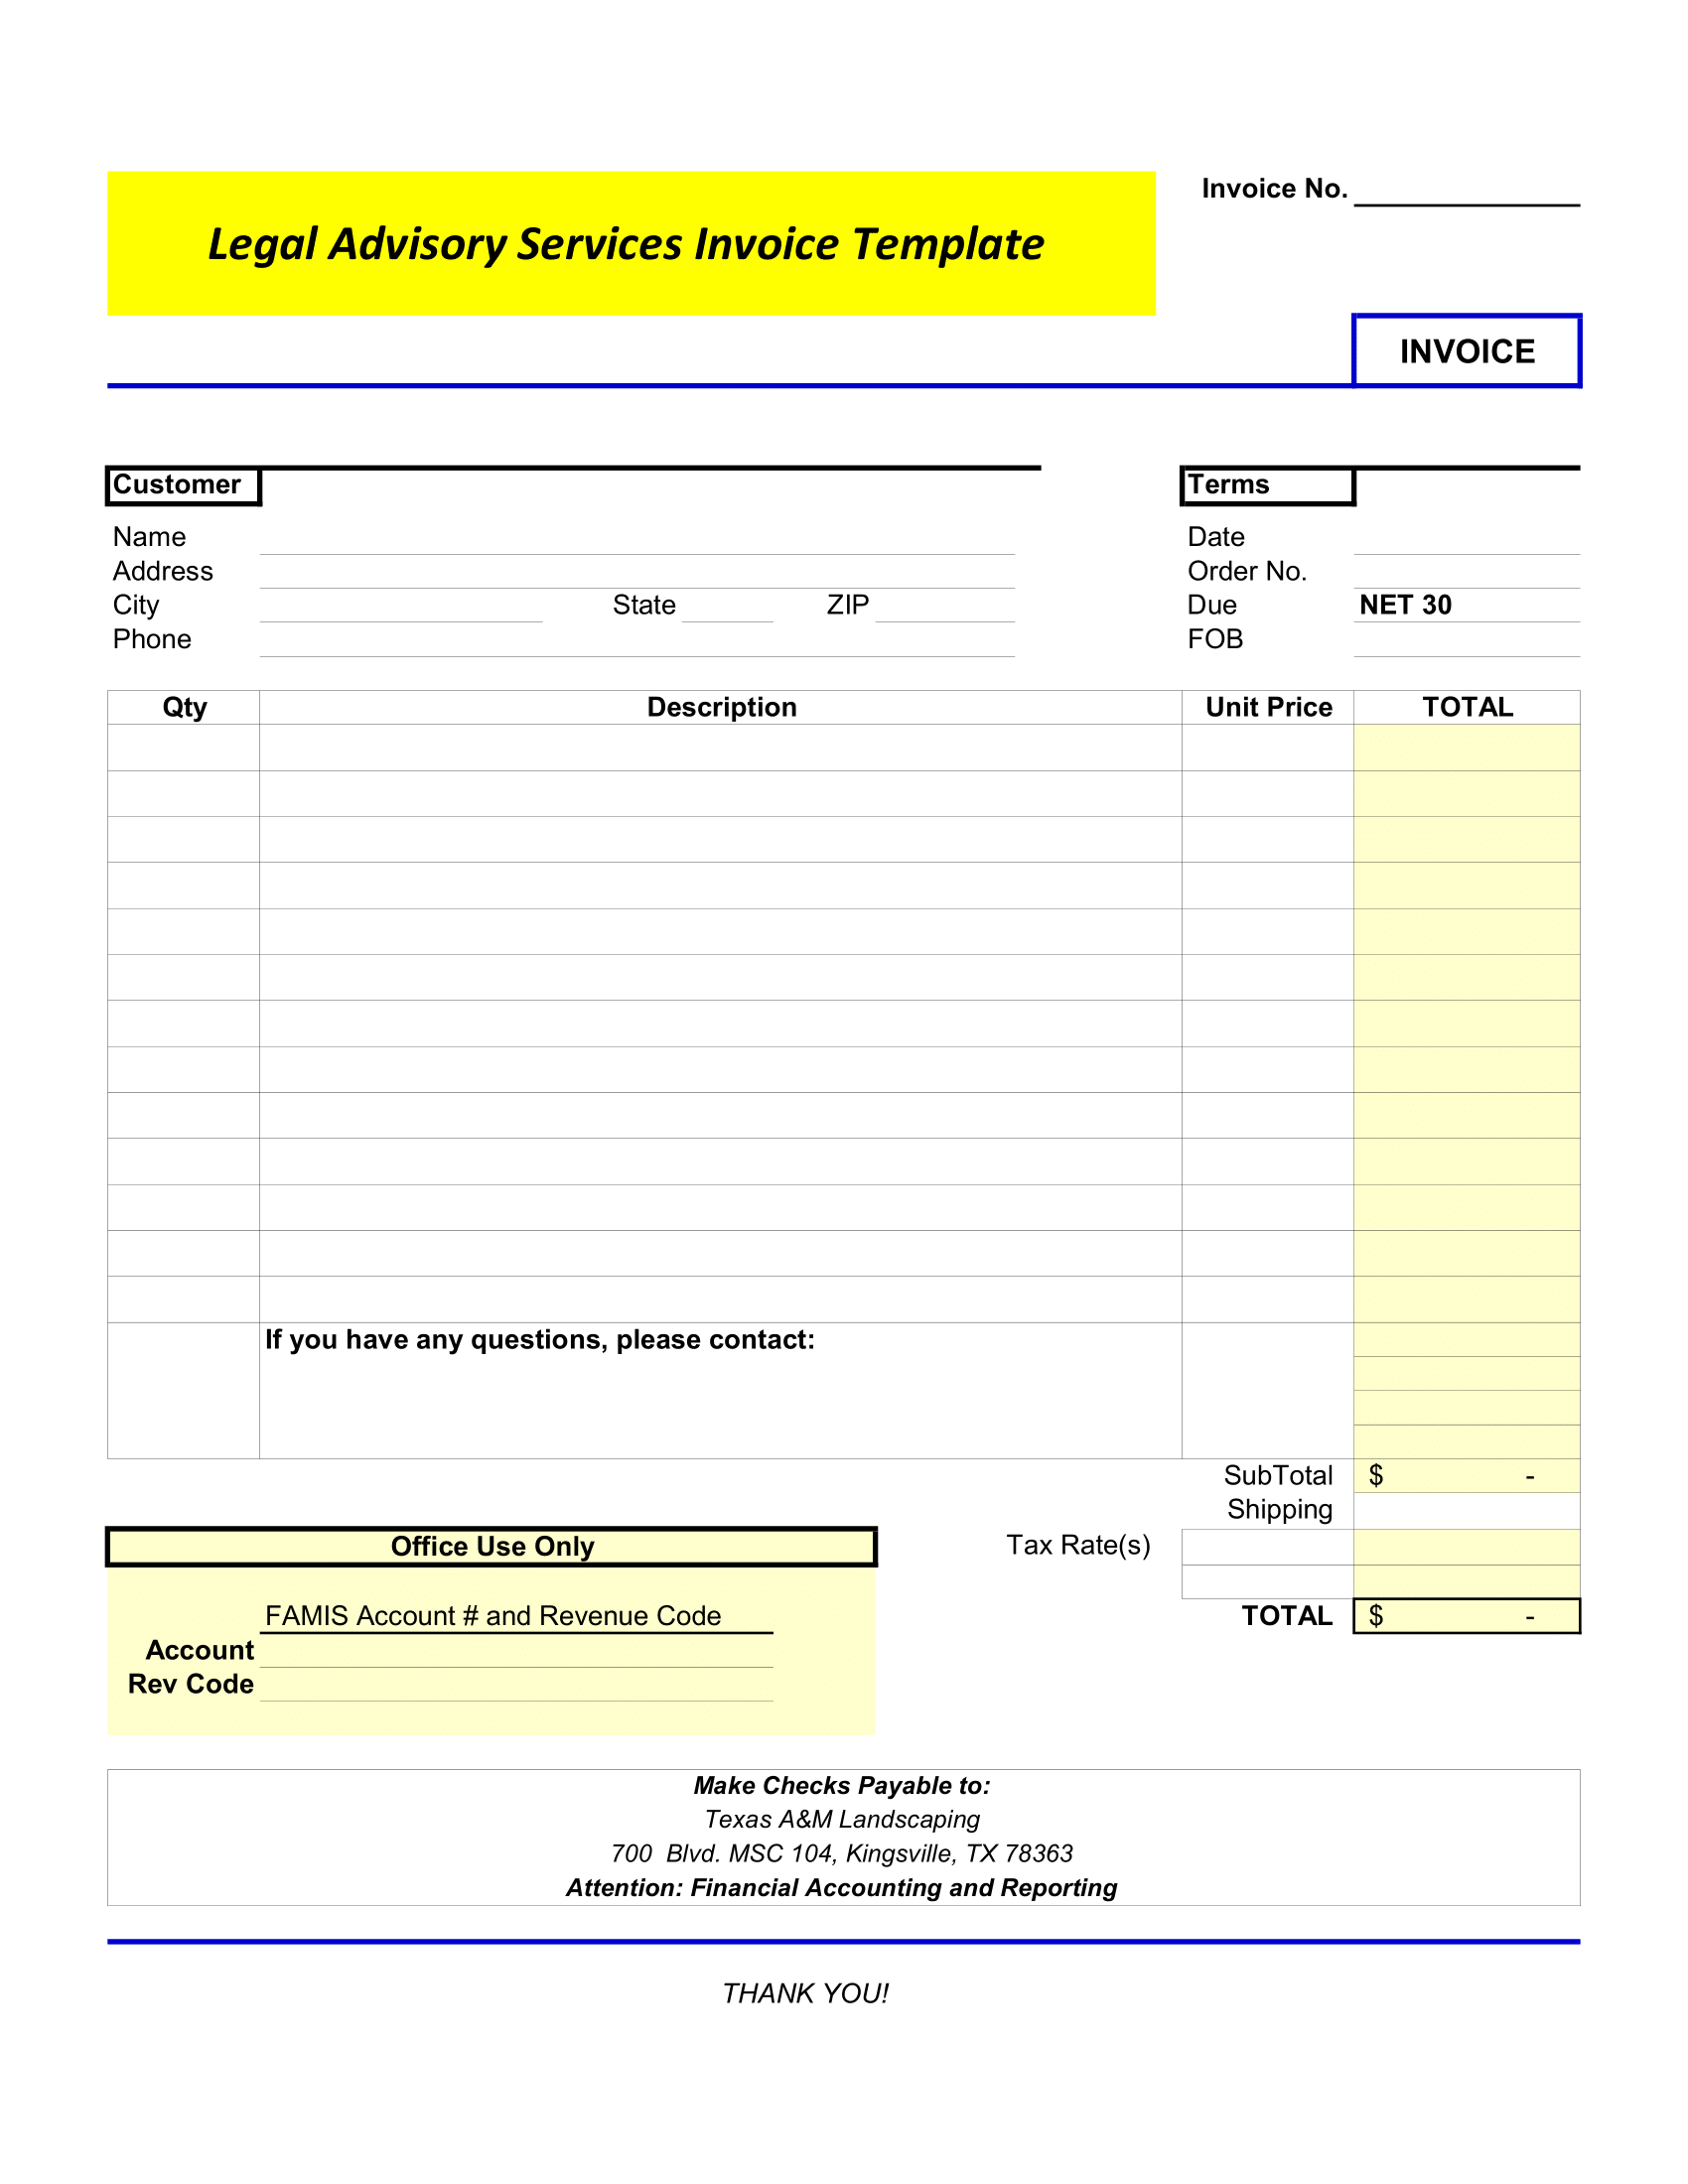 Legal advisory services template